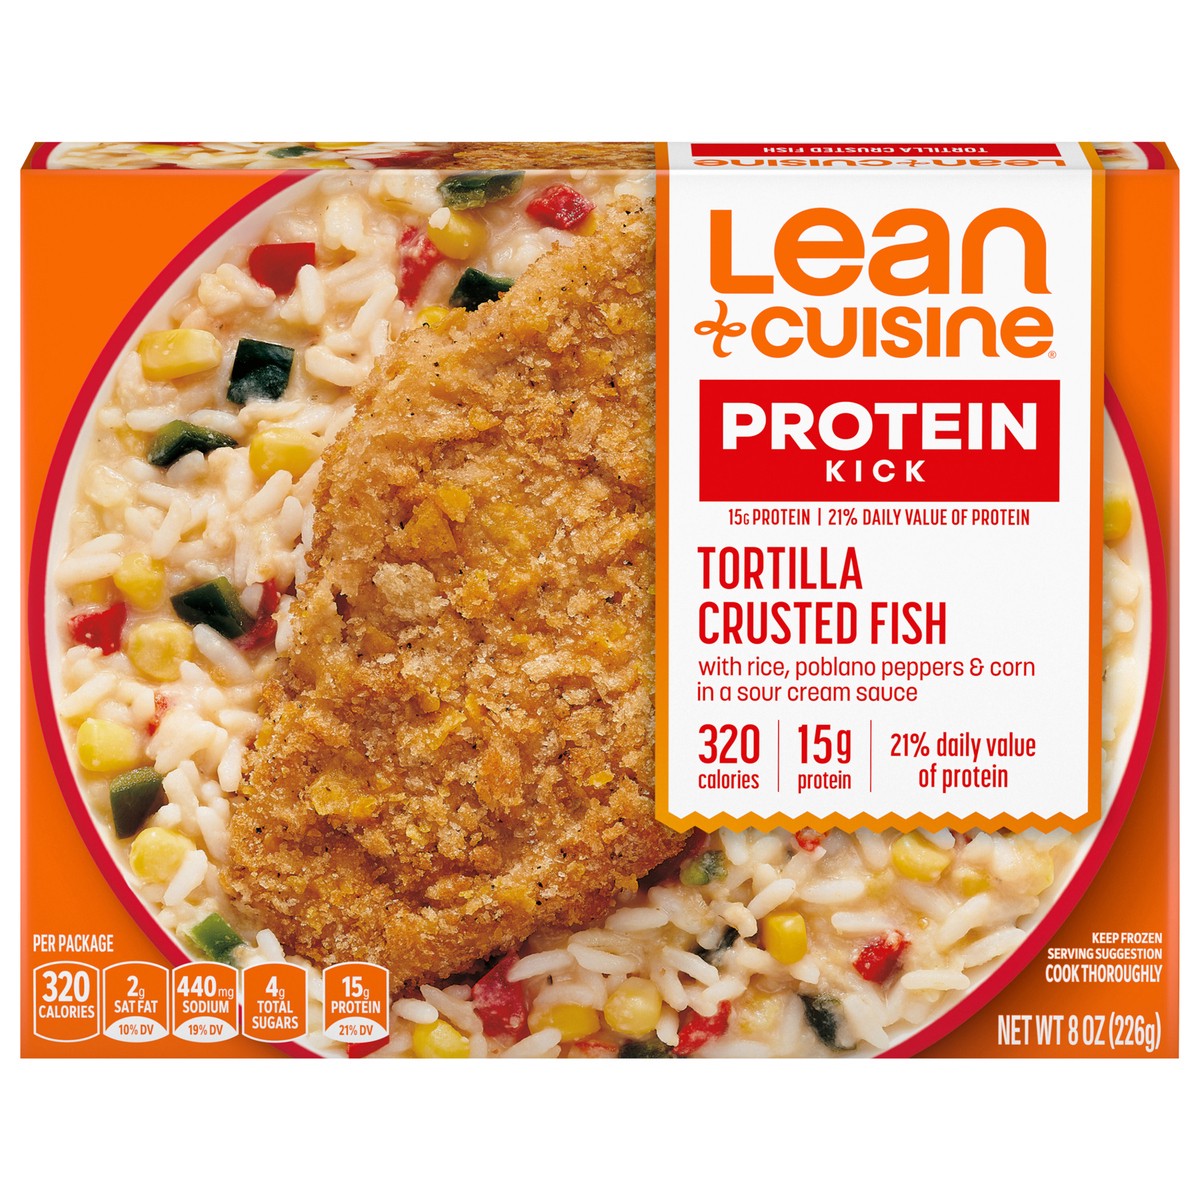 slide 1 of 9, Lean Cuisine Frozen Meal Tortilla Crusted Fish, Protein Kick Microwave Meal, Microwave Fish Dinner, Frozen Dinner for One, 8 oz